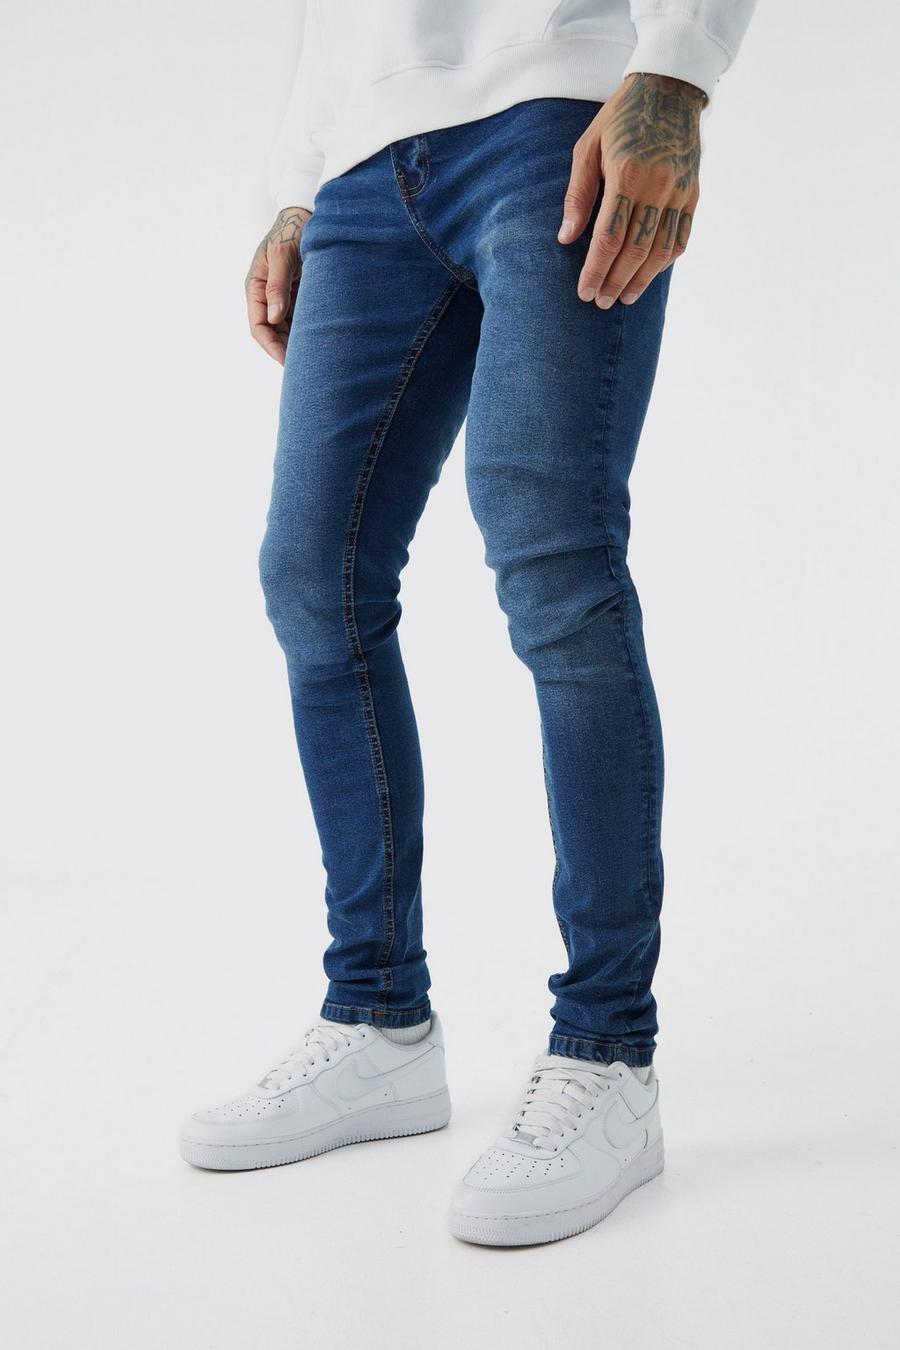 Tall Skinny Stretch Stacked Jeans